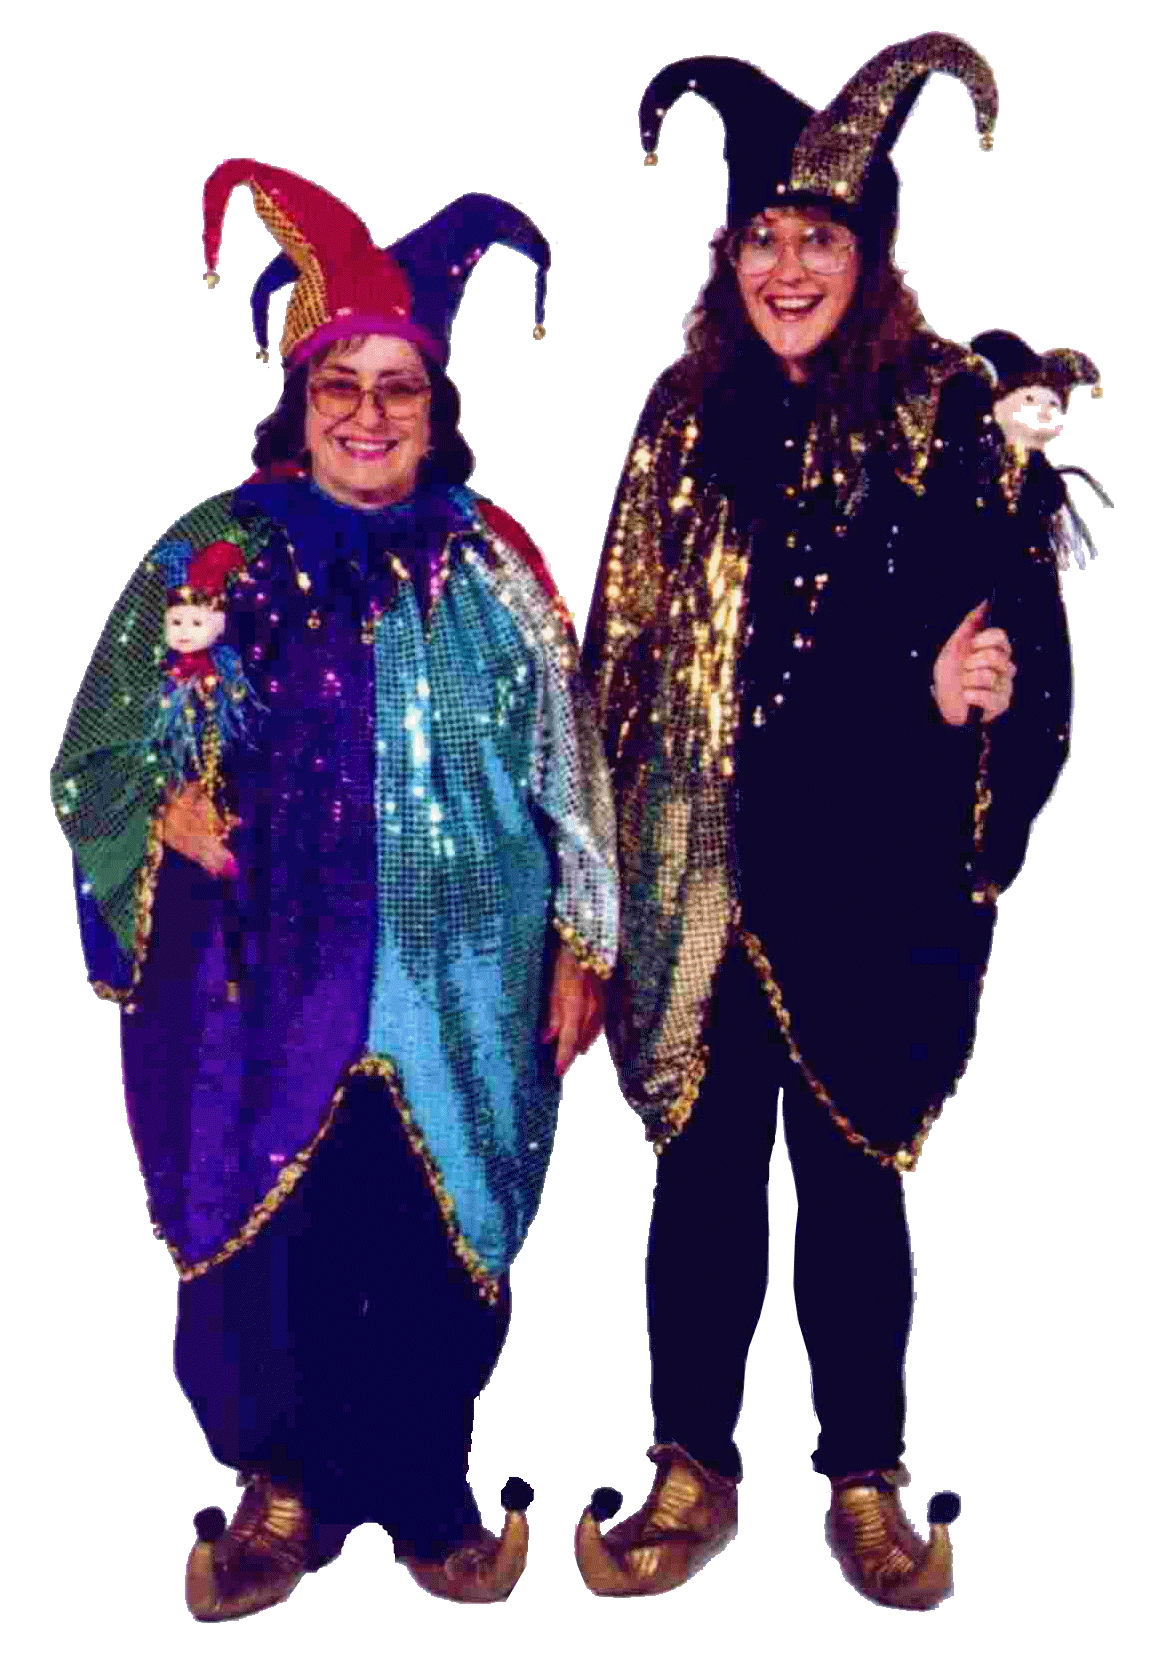 Costume World's owner Sue (right), and her mother, Marjorie, at the 1997 N.C.A. Convention in Las Vegas.